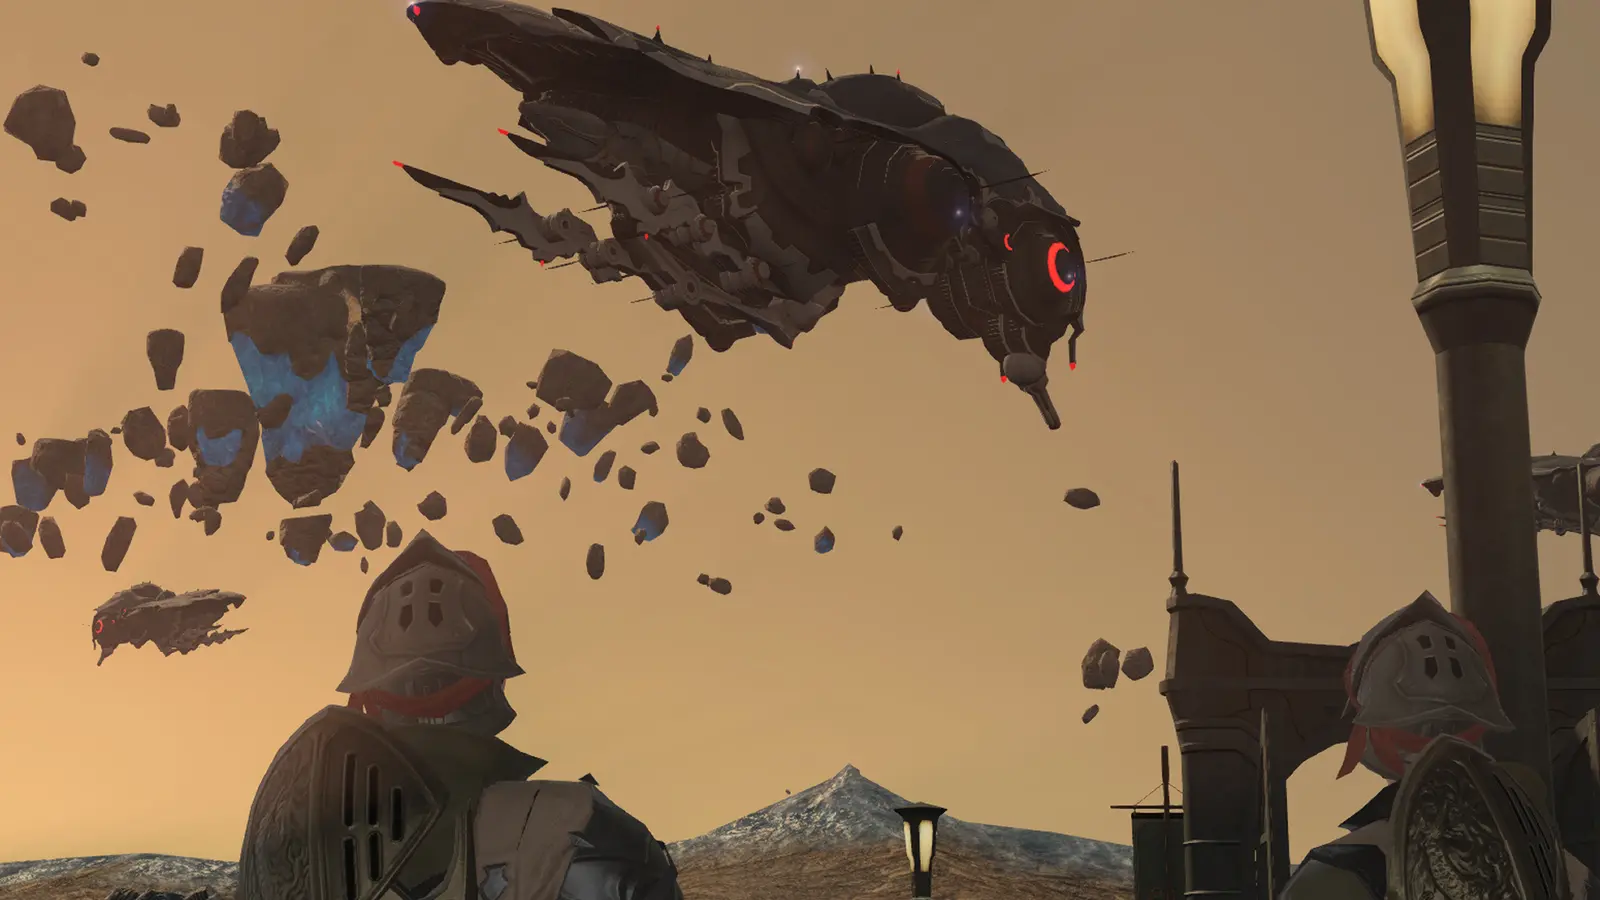 An image of Zadnor, an exploration zone involved in obtaining Relic Weapons in Final Fantasy XIV: Shadowbringers. Two helmeted soldiers look up at floating islands and enemy airships.